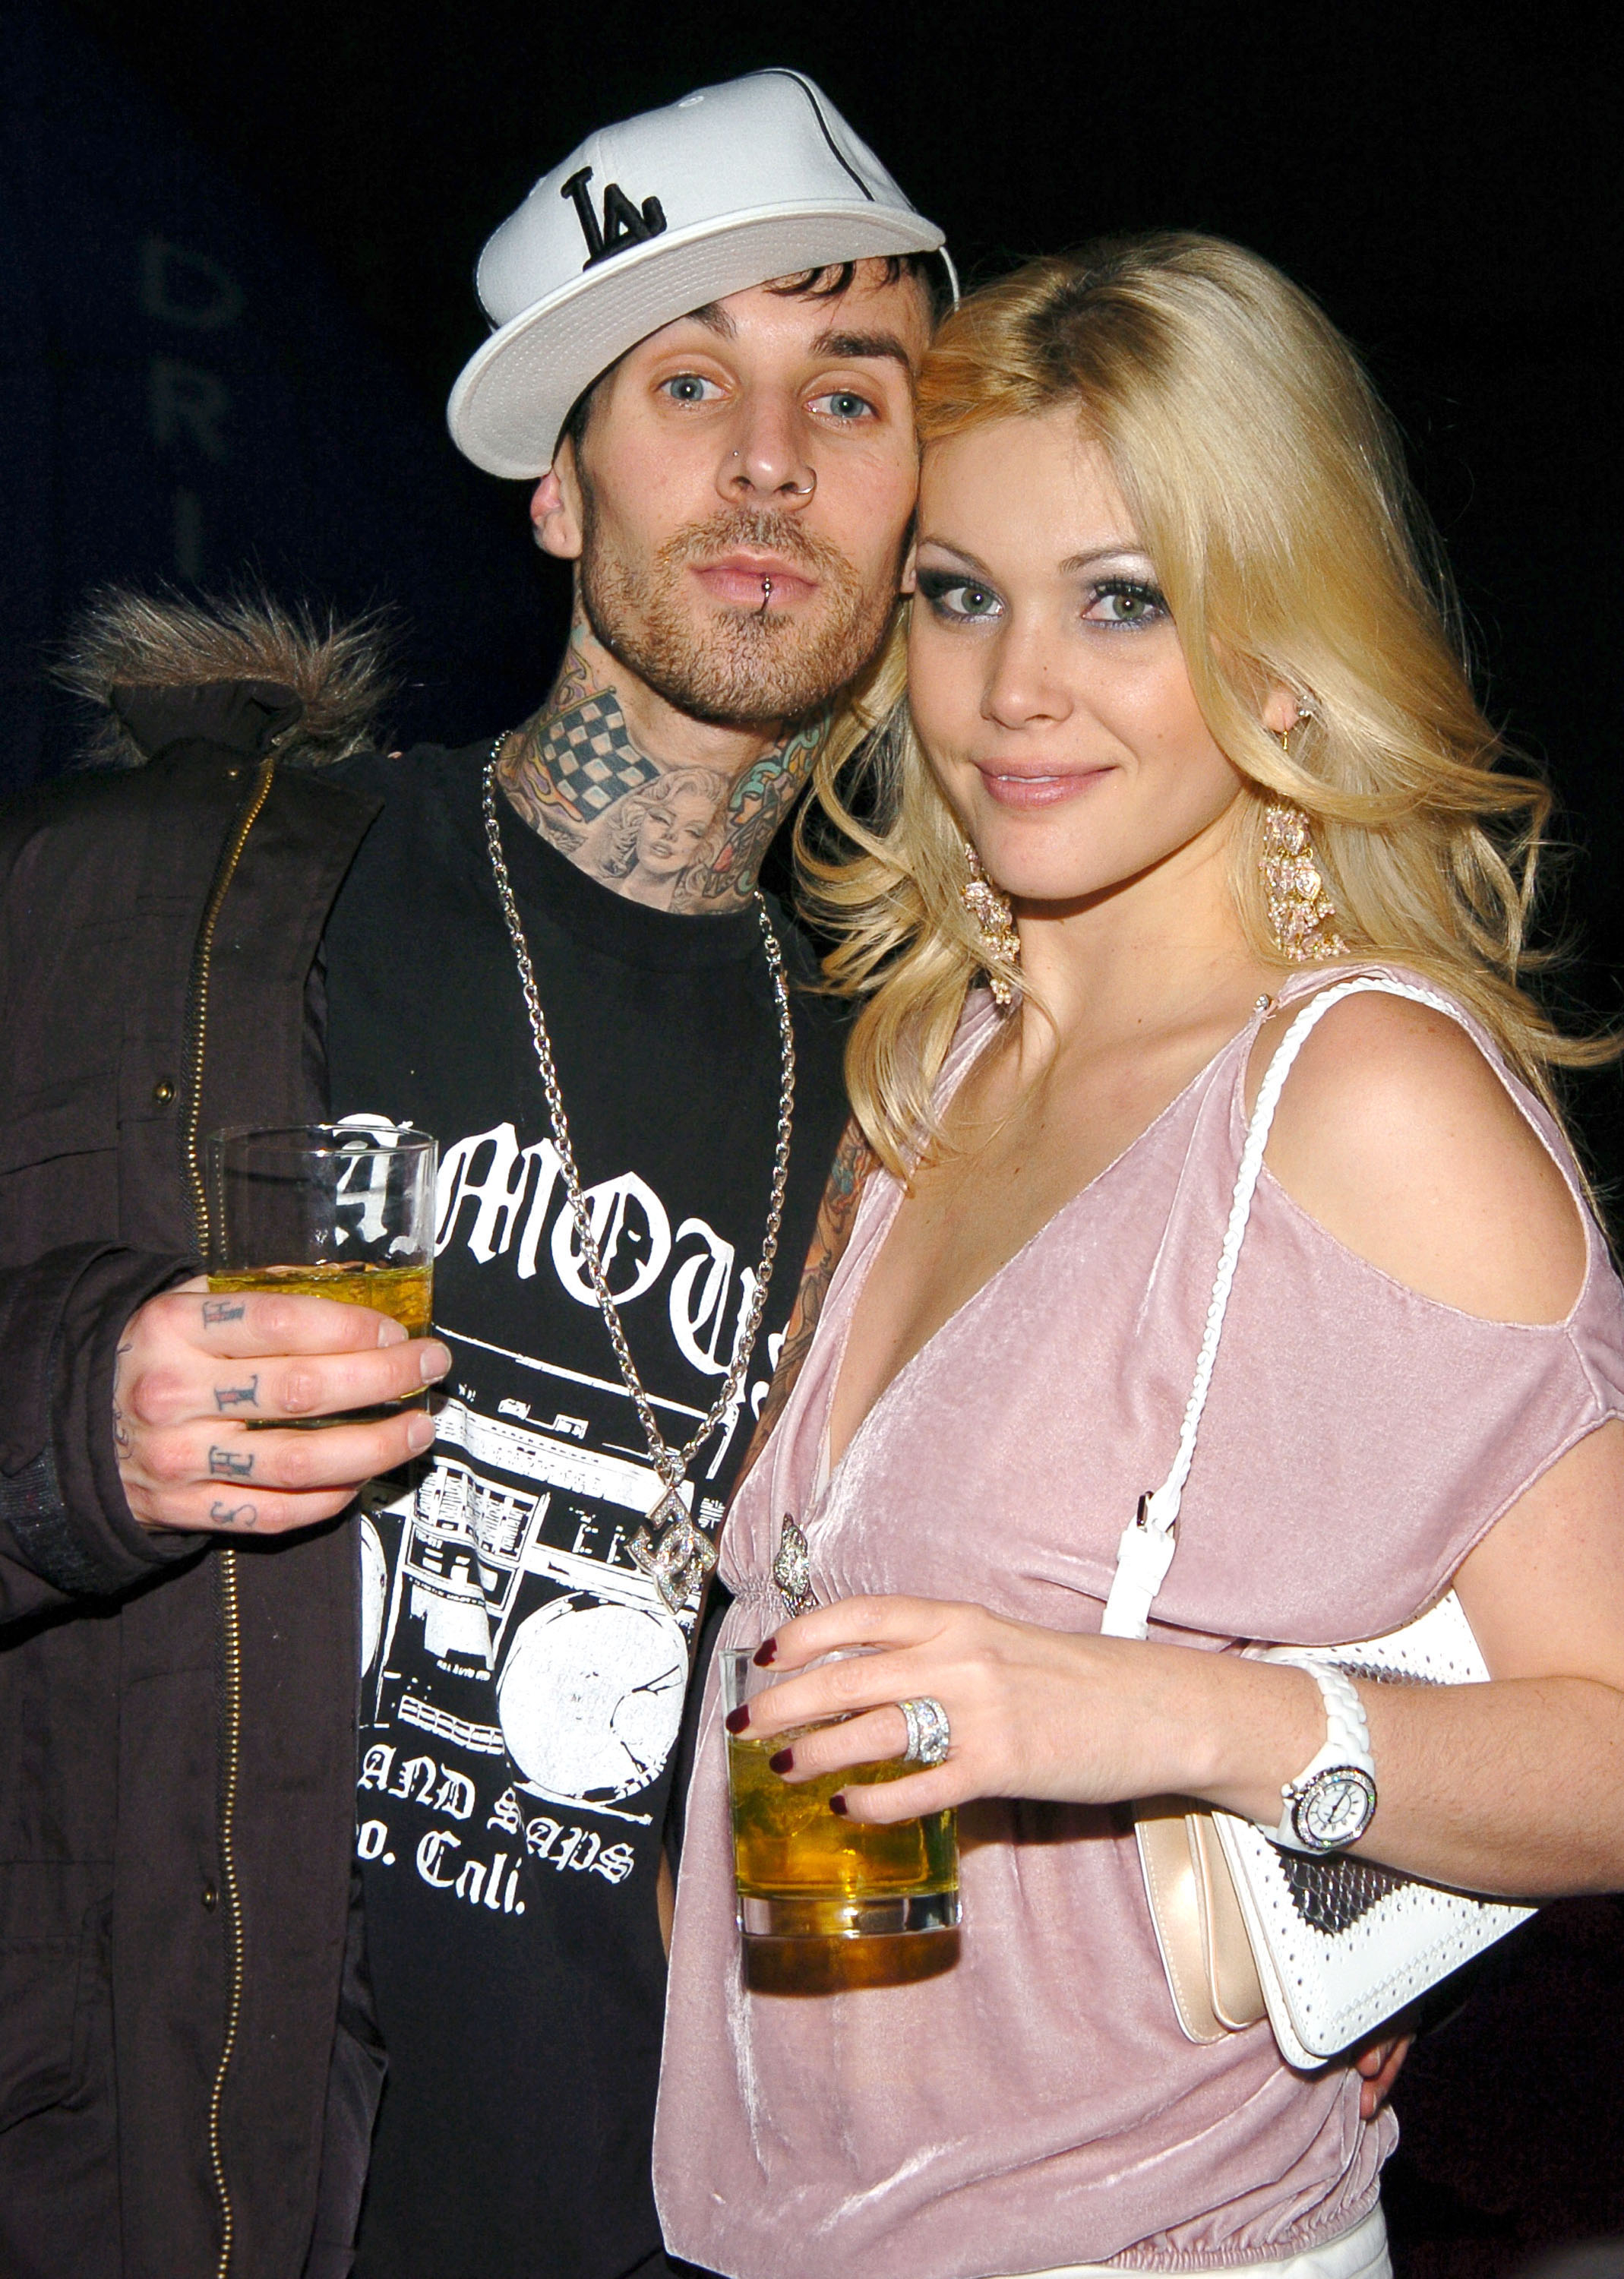 travis and shanna at a party